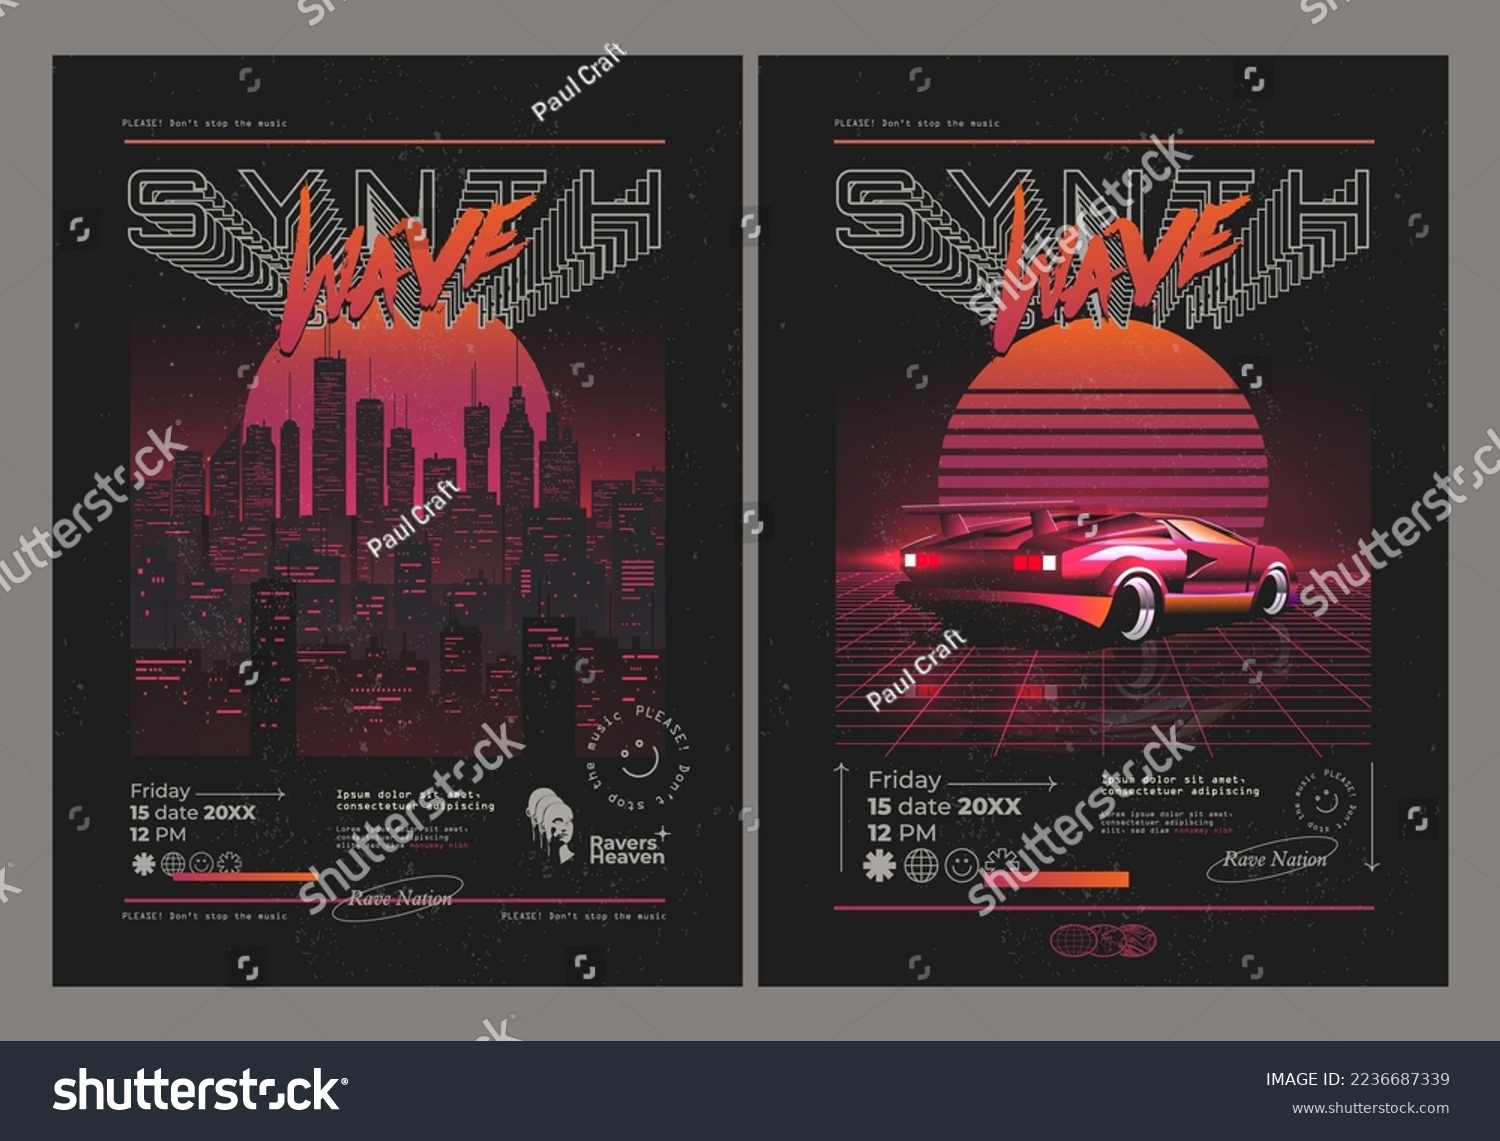 SVG of Vintage synthwave or retrowave styled party or music festival or concert flaers or posters design template with retro neon city and sport car on dark background. Vector illustration svg